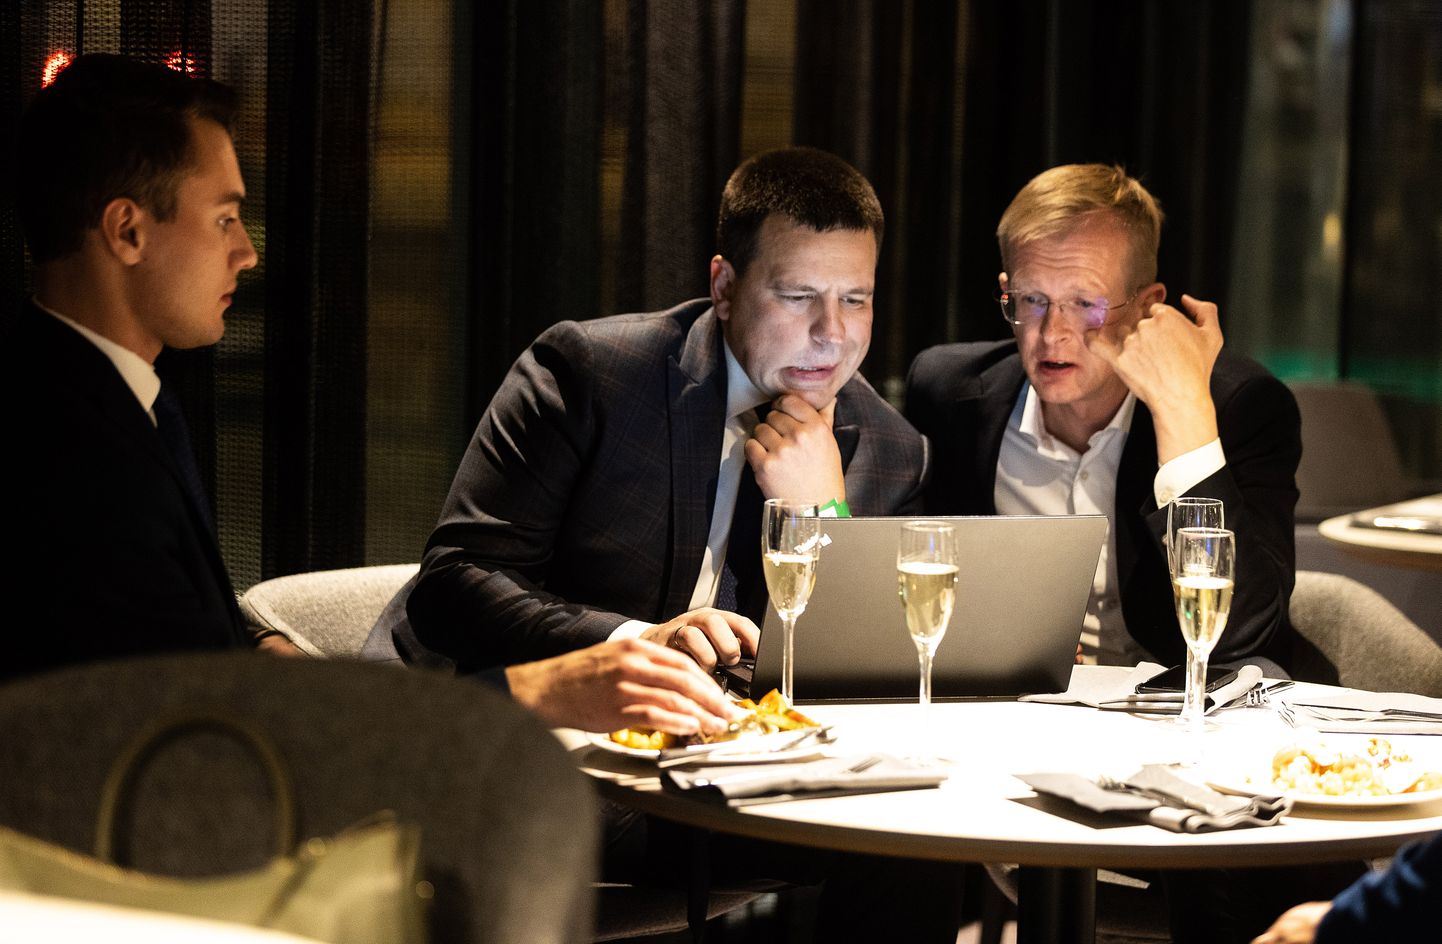 The leader of the Center Party Jüri Ratas and the current chairman of the Tallinn City Council Tiit Terik closely monitored the election results.